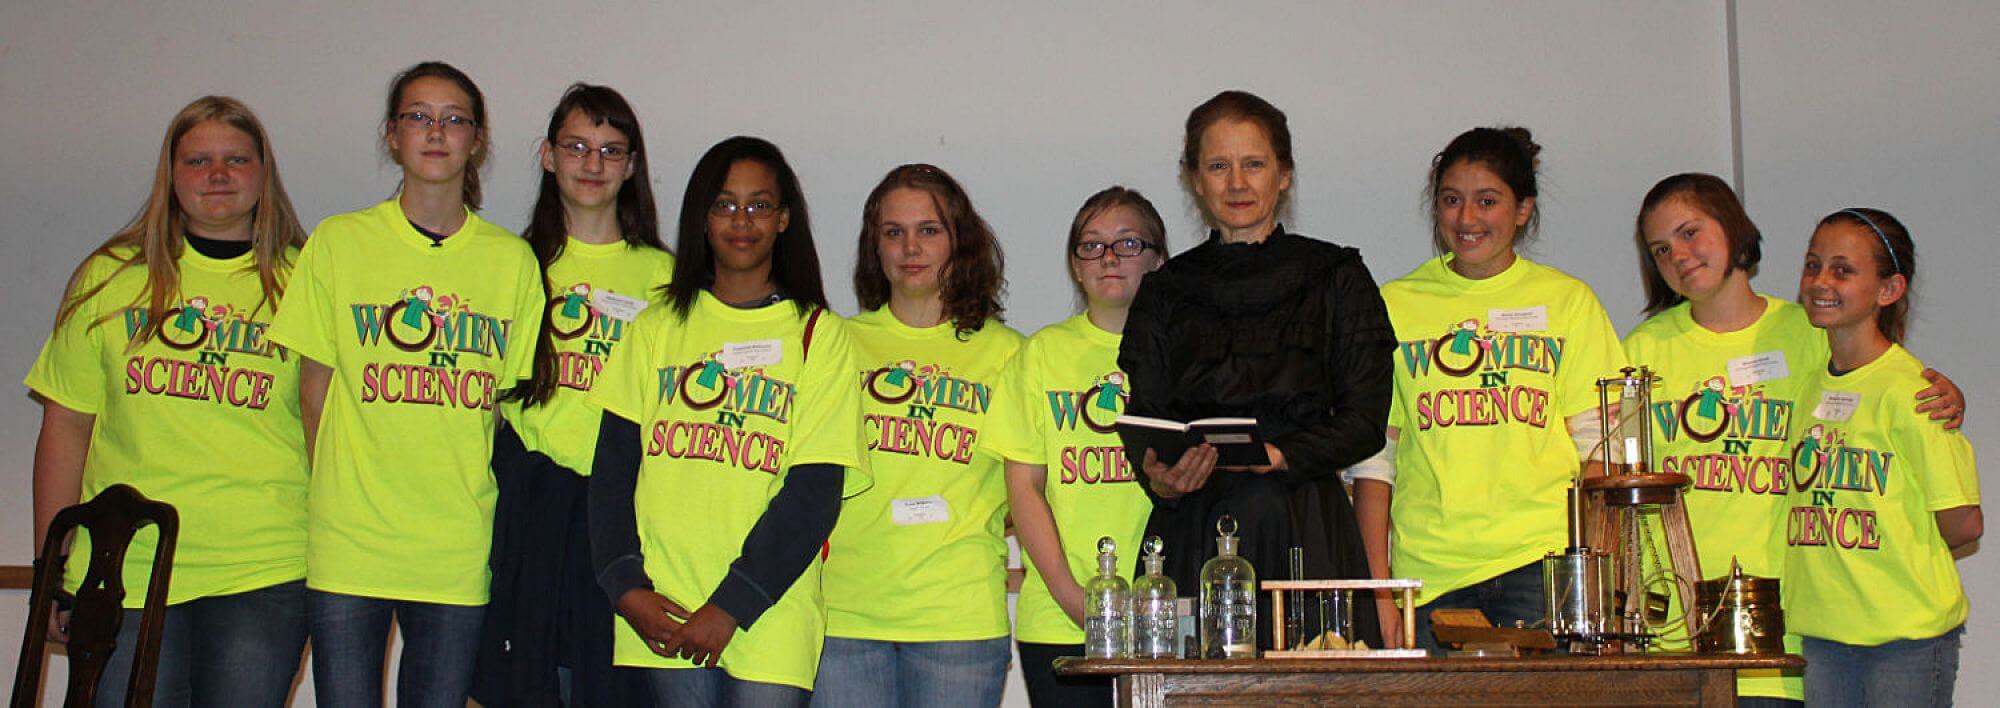 Visit with Marie Curie for Women in Science Day